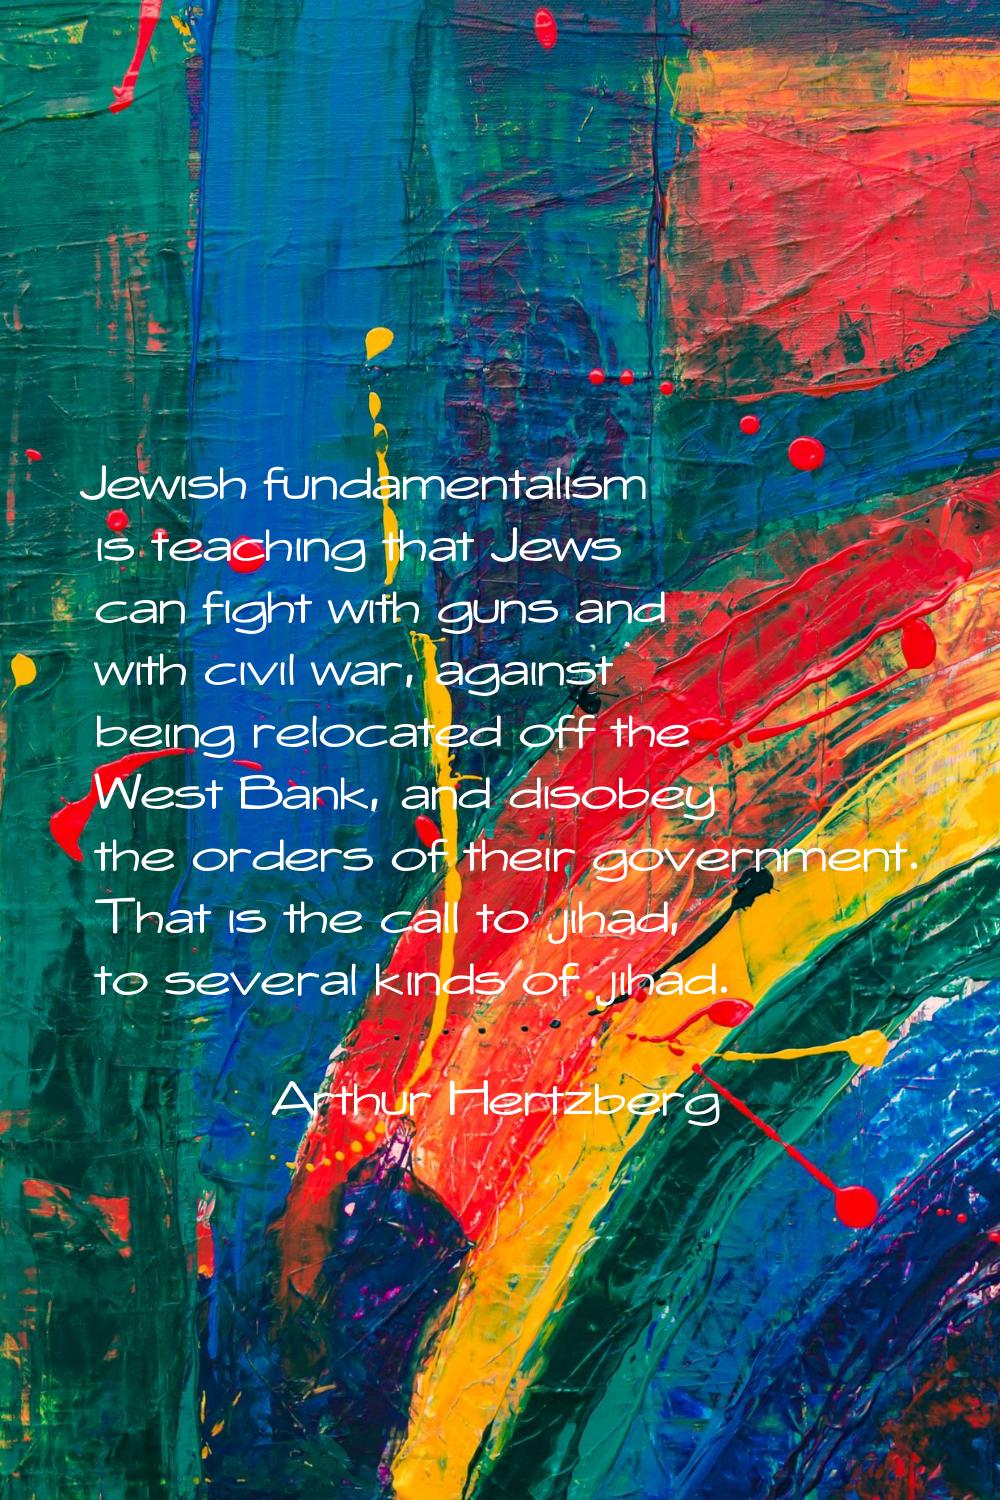 Jewish fundamentalism is teaching that Jews can fight with guns and with civil war, against being r